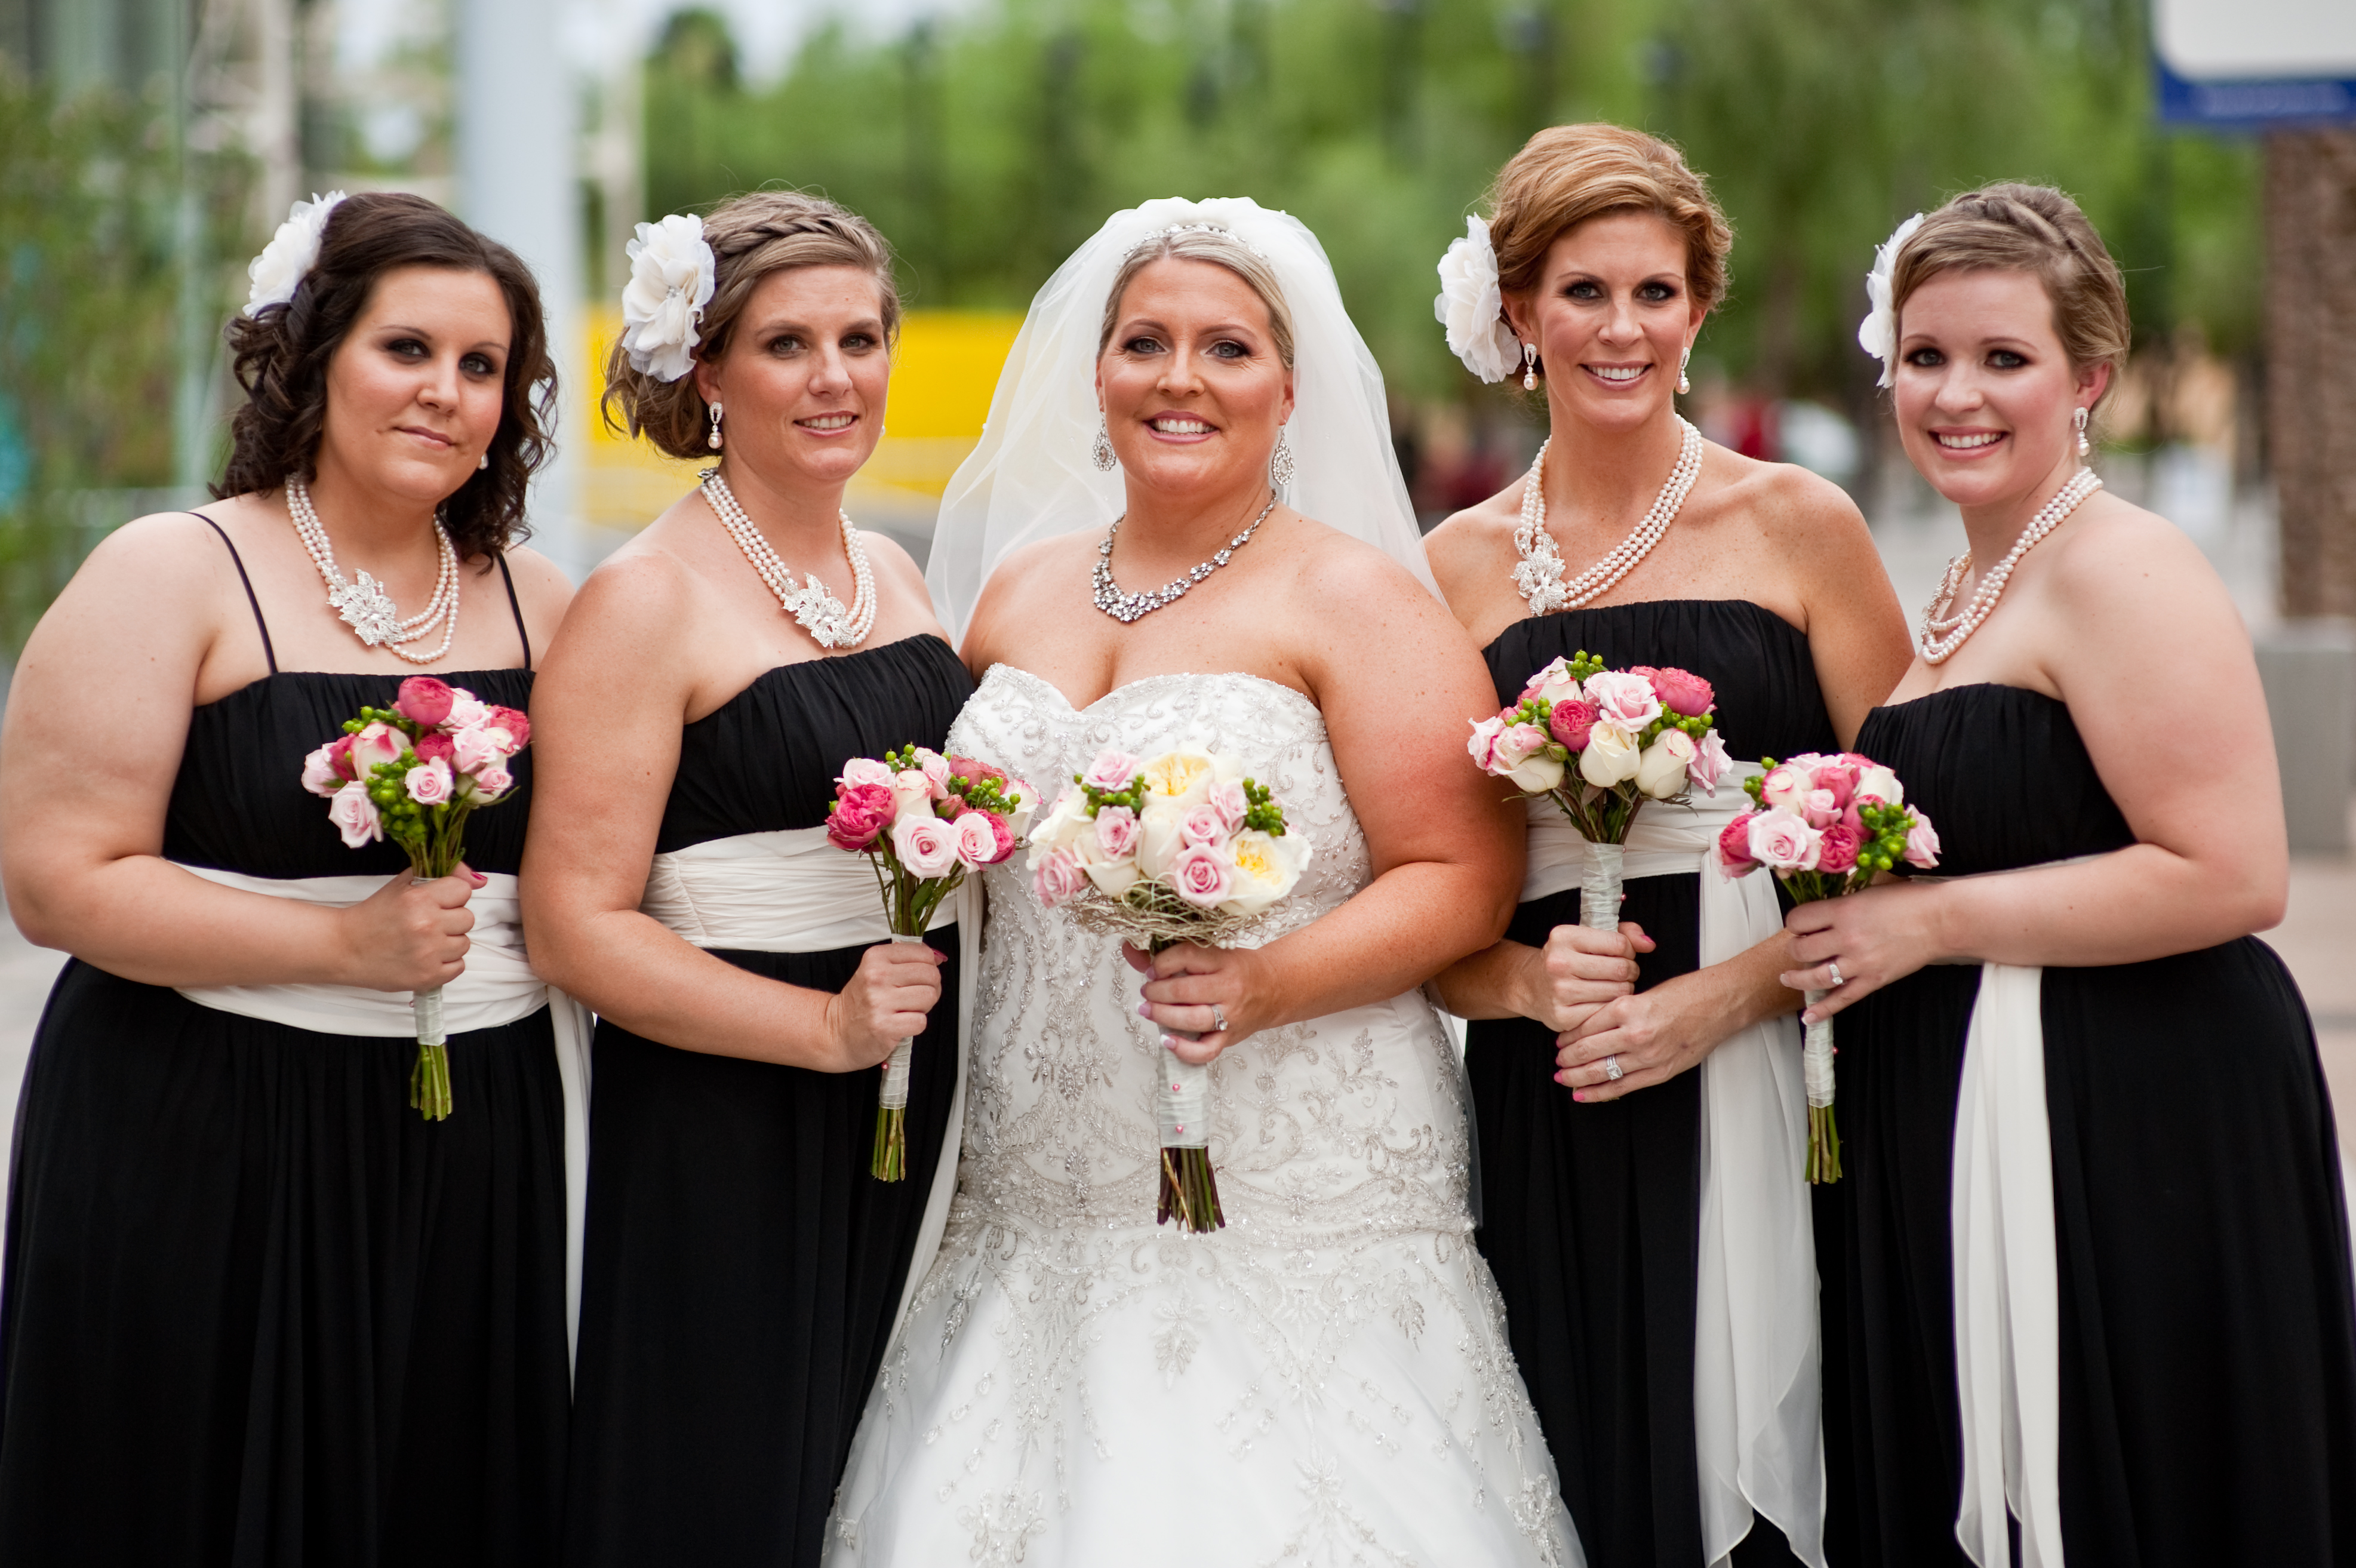 Sara’s Sparkly Gown and Tre Bella Wedding